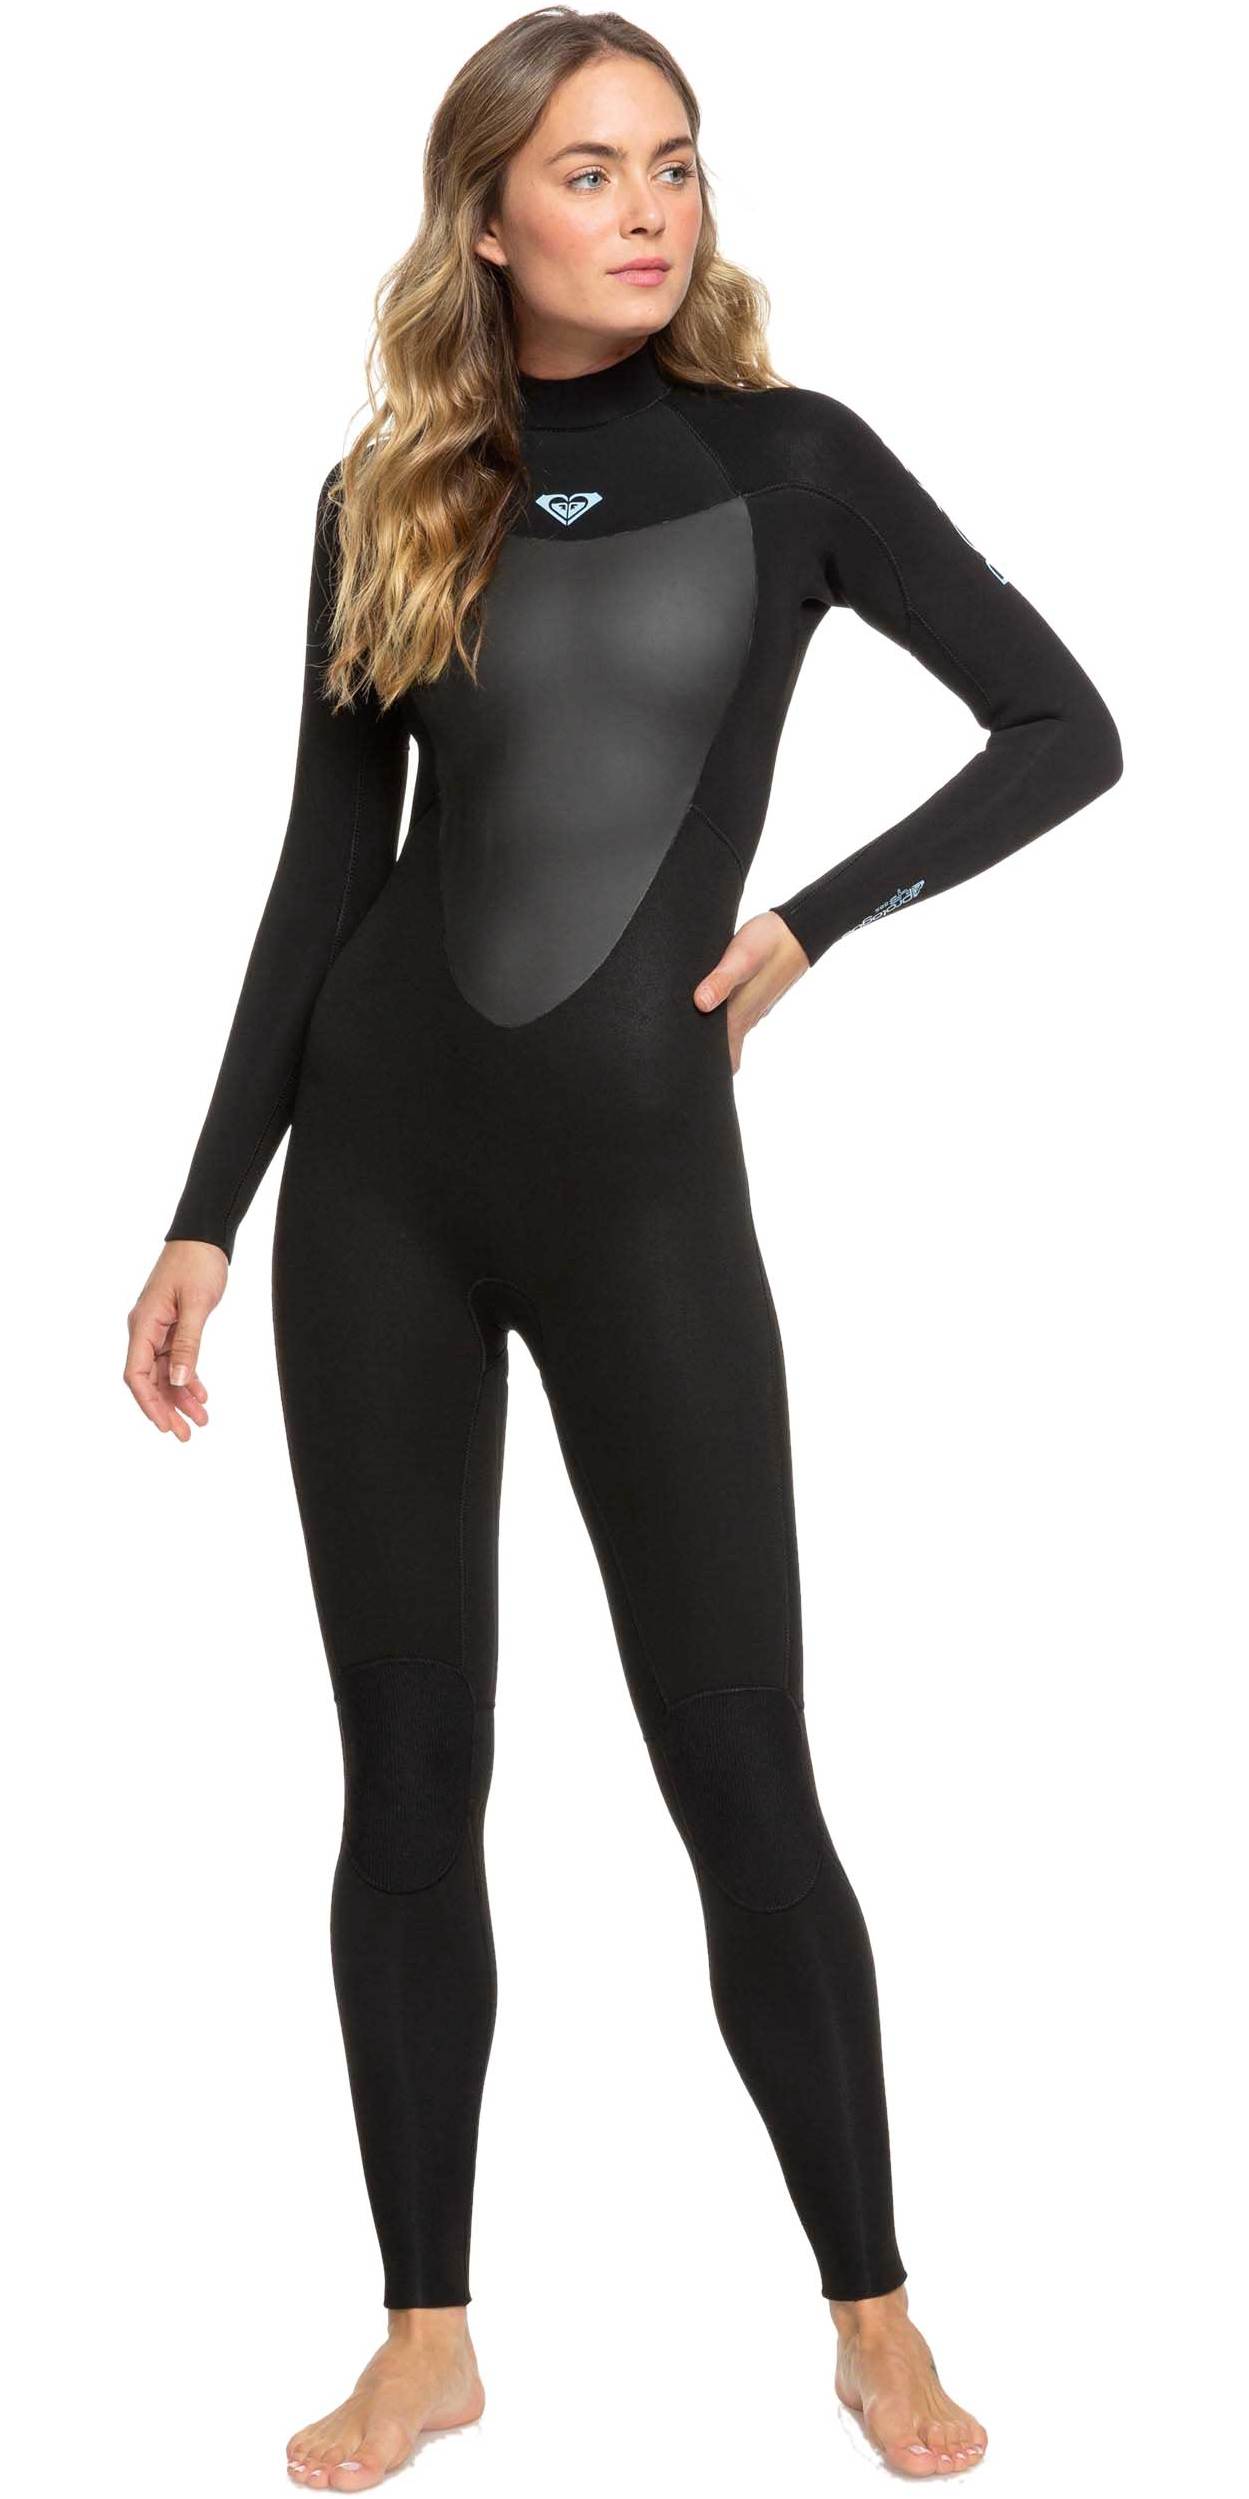 2023 Roxy Womens Prologue 5/4/3mm Back Wetsuit ERJW103073 - Black - Wetsuits | Watersports Outlet